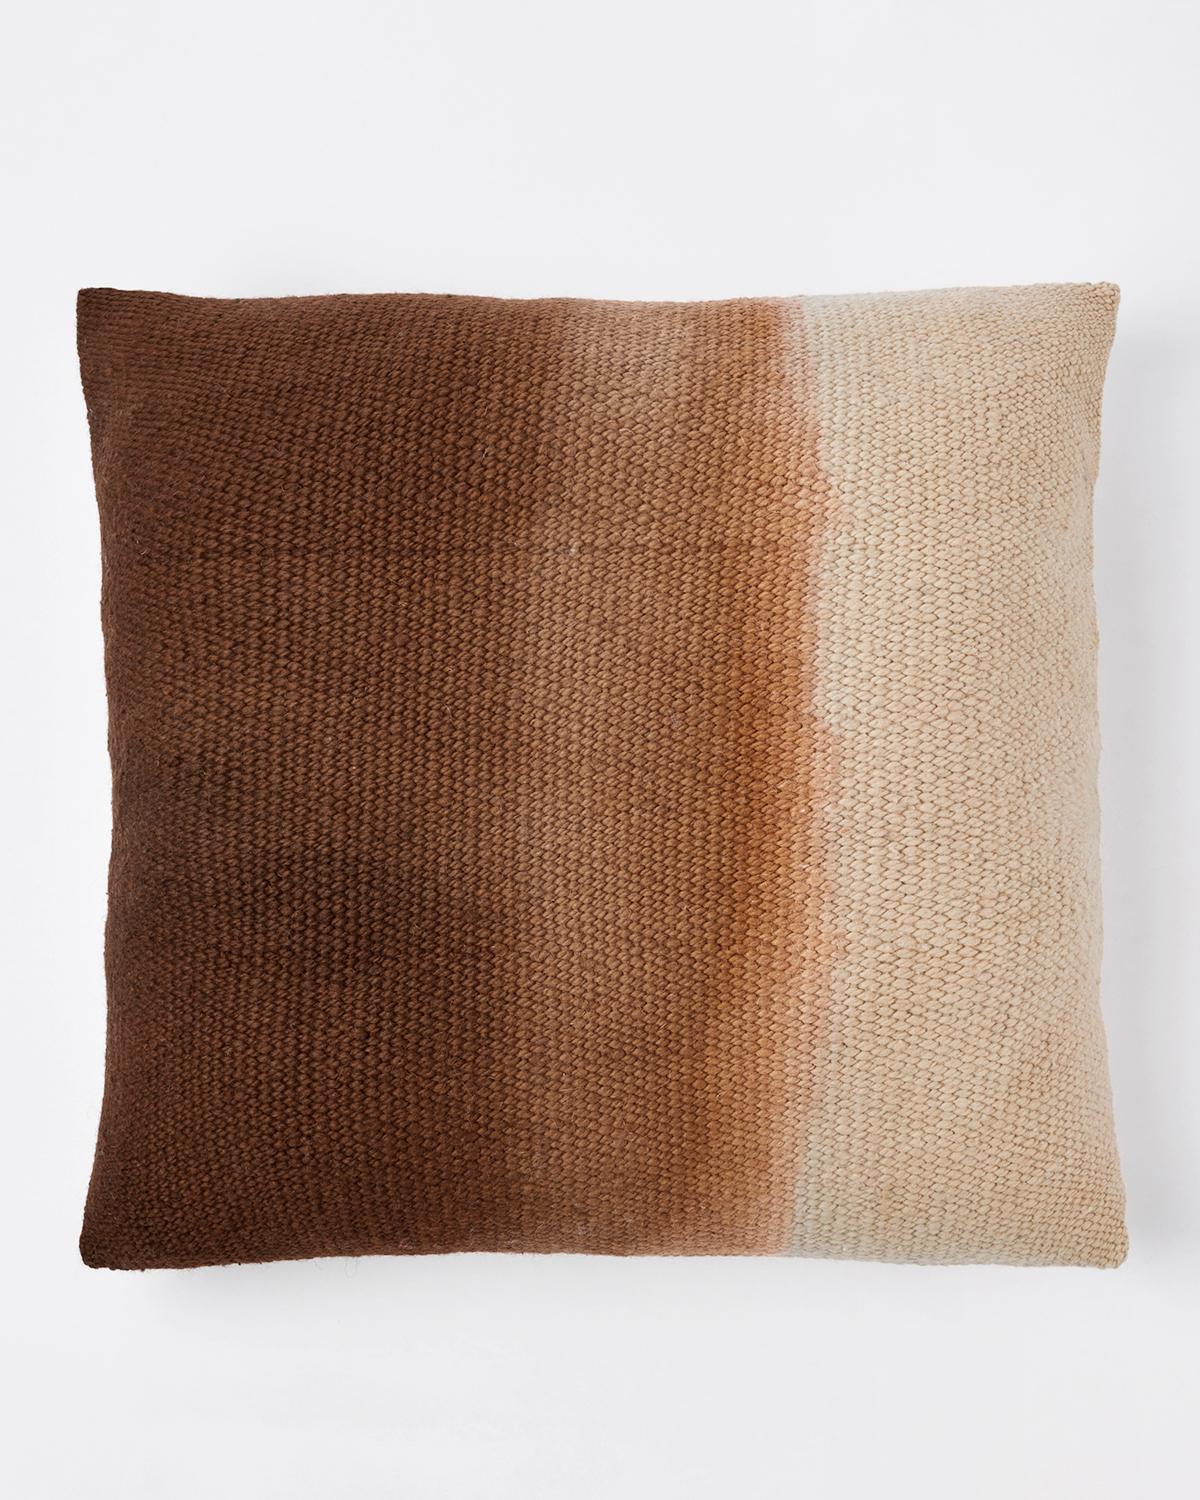 Hand-Crafted Matiz Brown Ombre Throw Pillow Handwoven Textured Sheep Wool For Sale